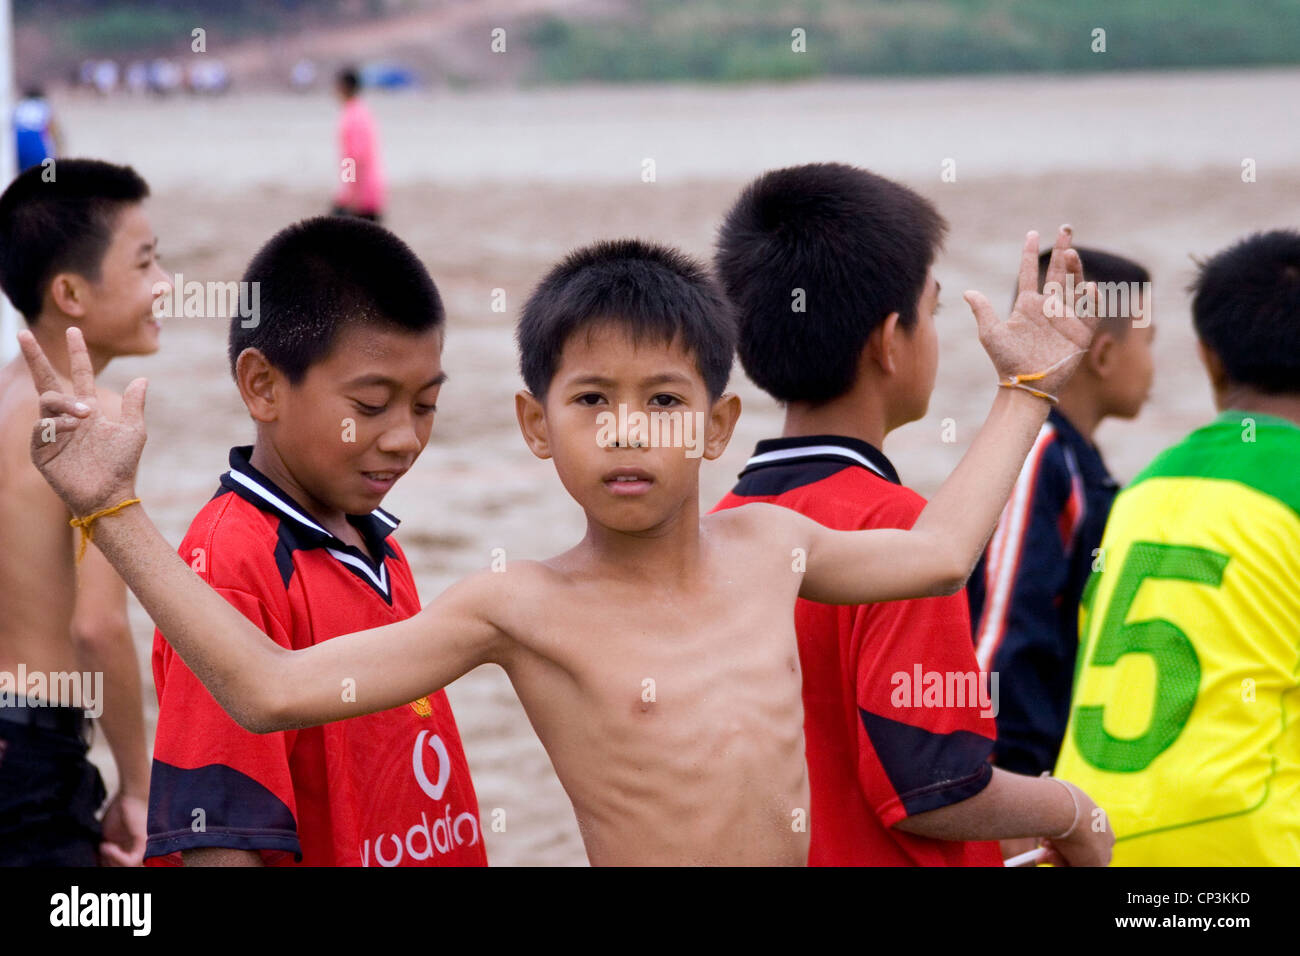 A young boy soccer (football) player is standing with team mates at a match at the Mekong River in Vientiane, Laos. Stock Photo